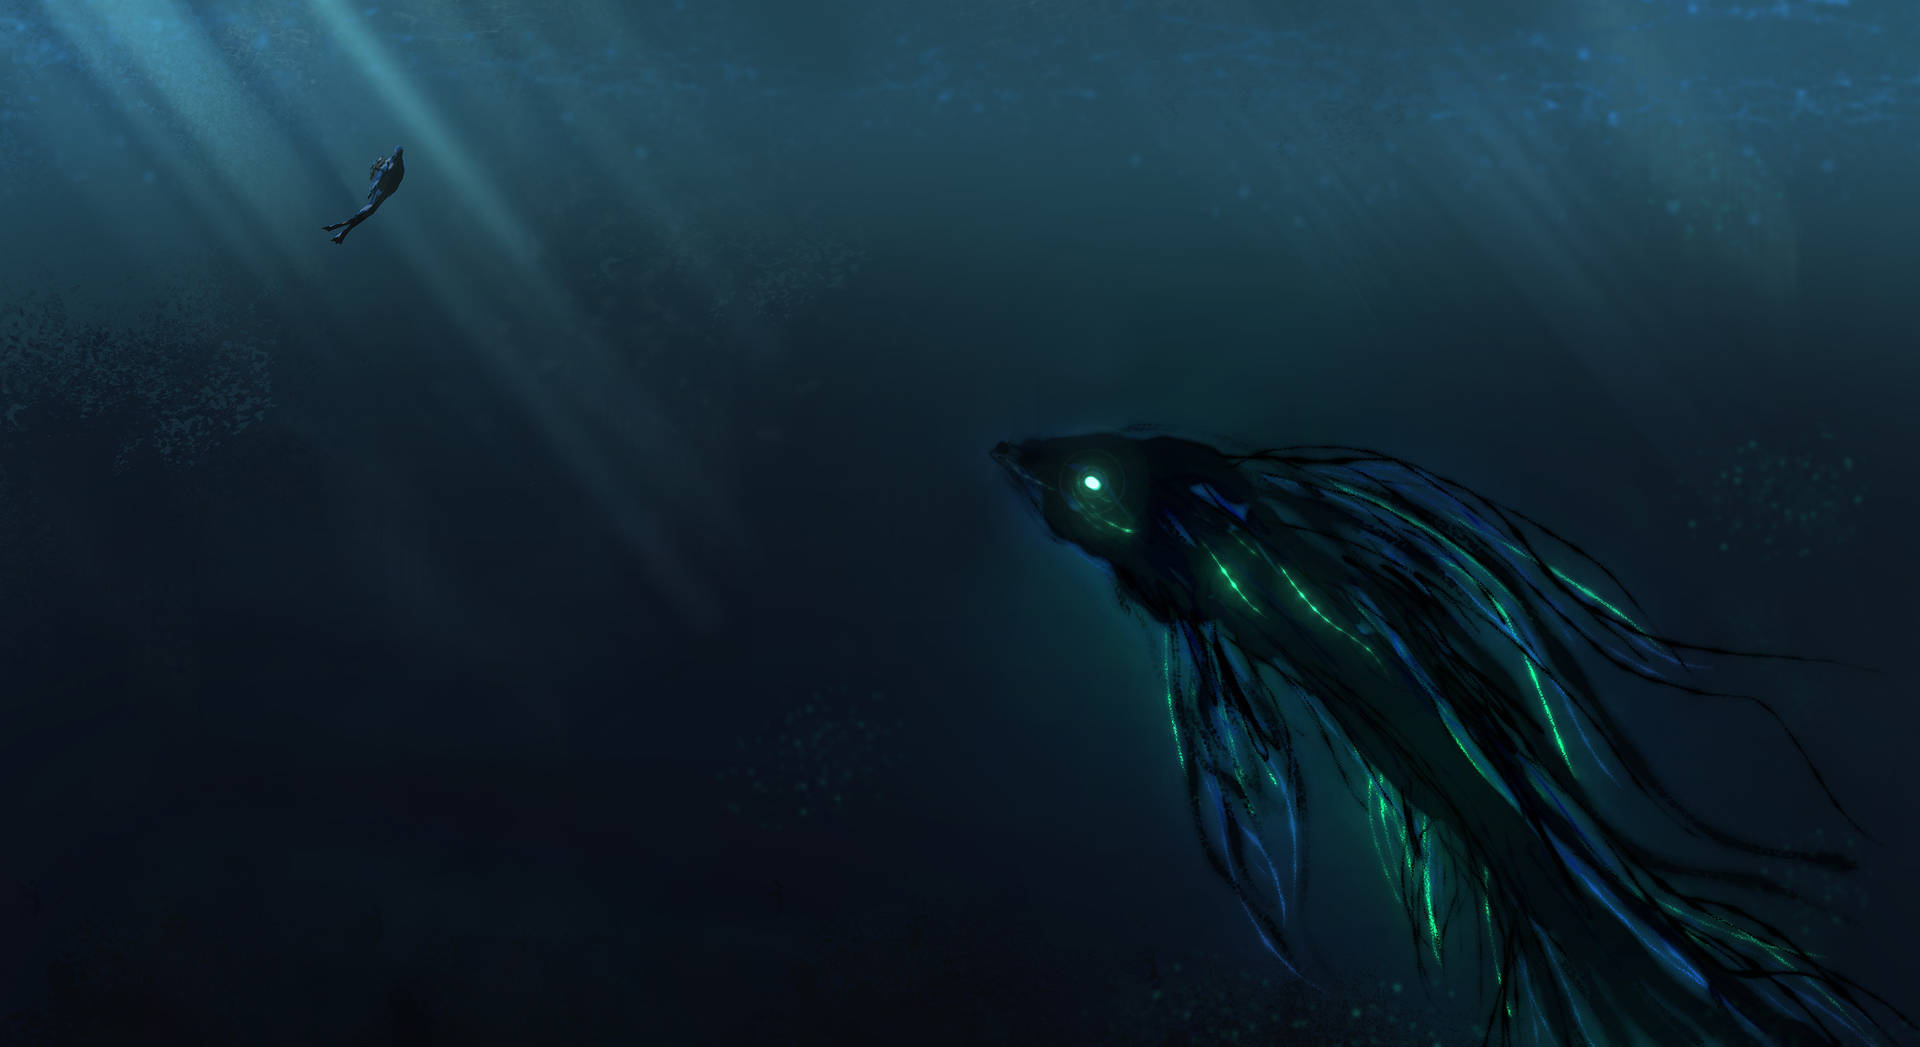 Astonishing Encounter Underwater - Scuba Diving with Glowing Sea Creatures Wallpaper